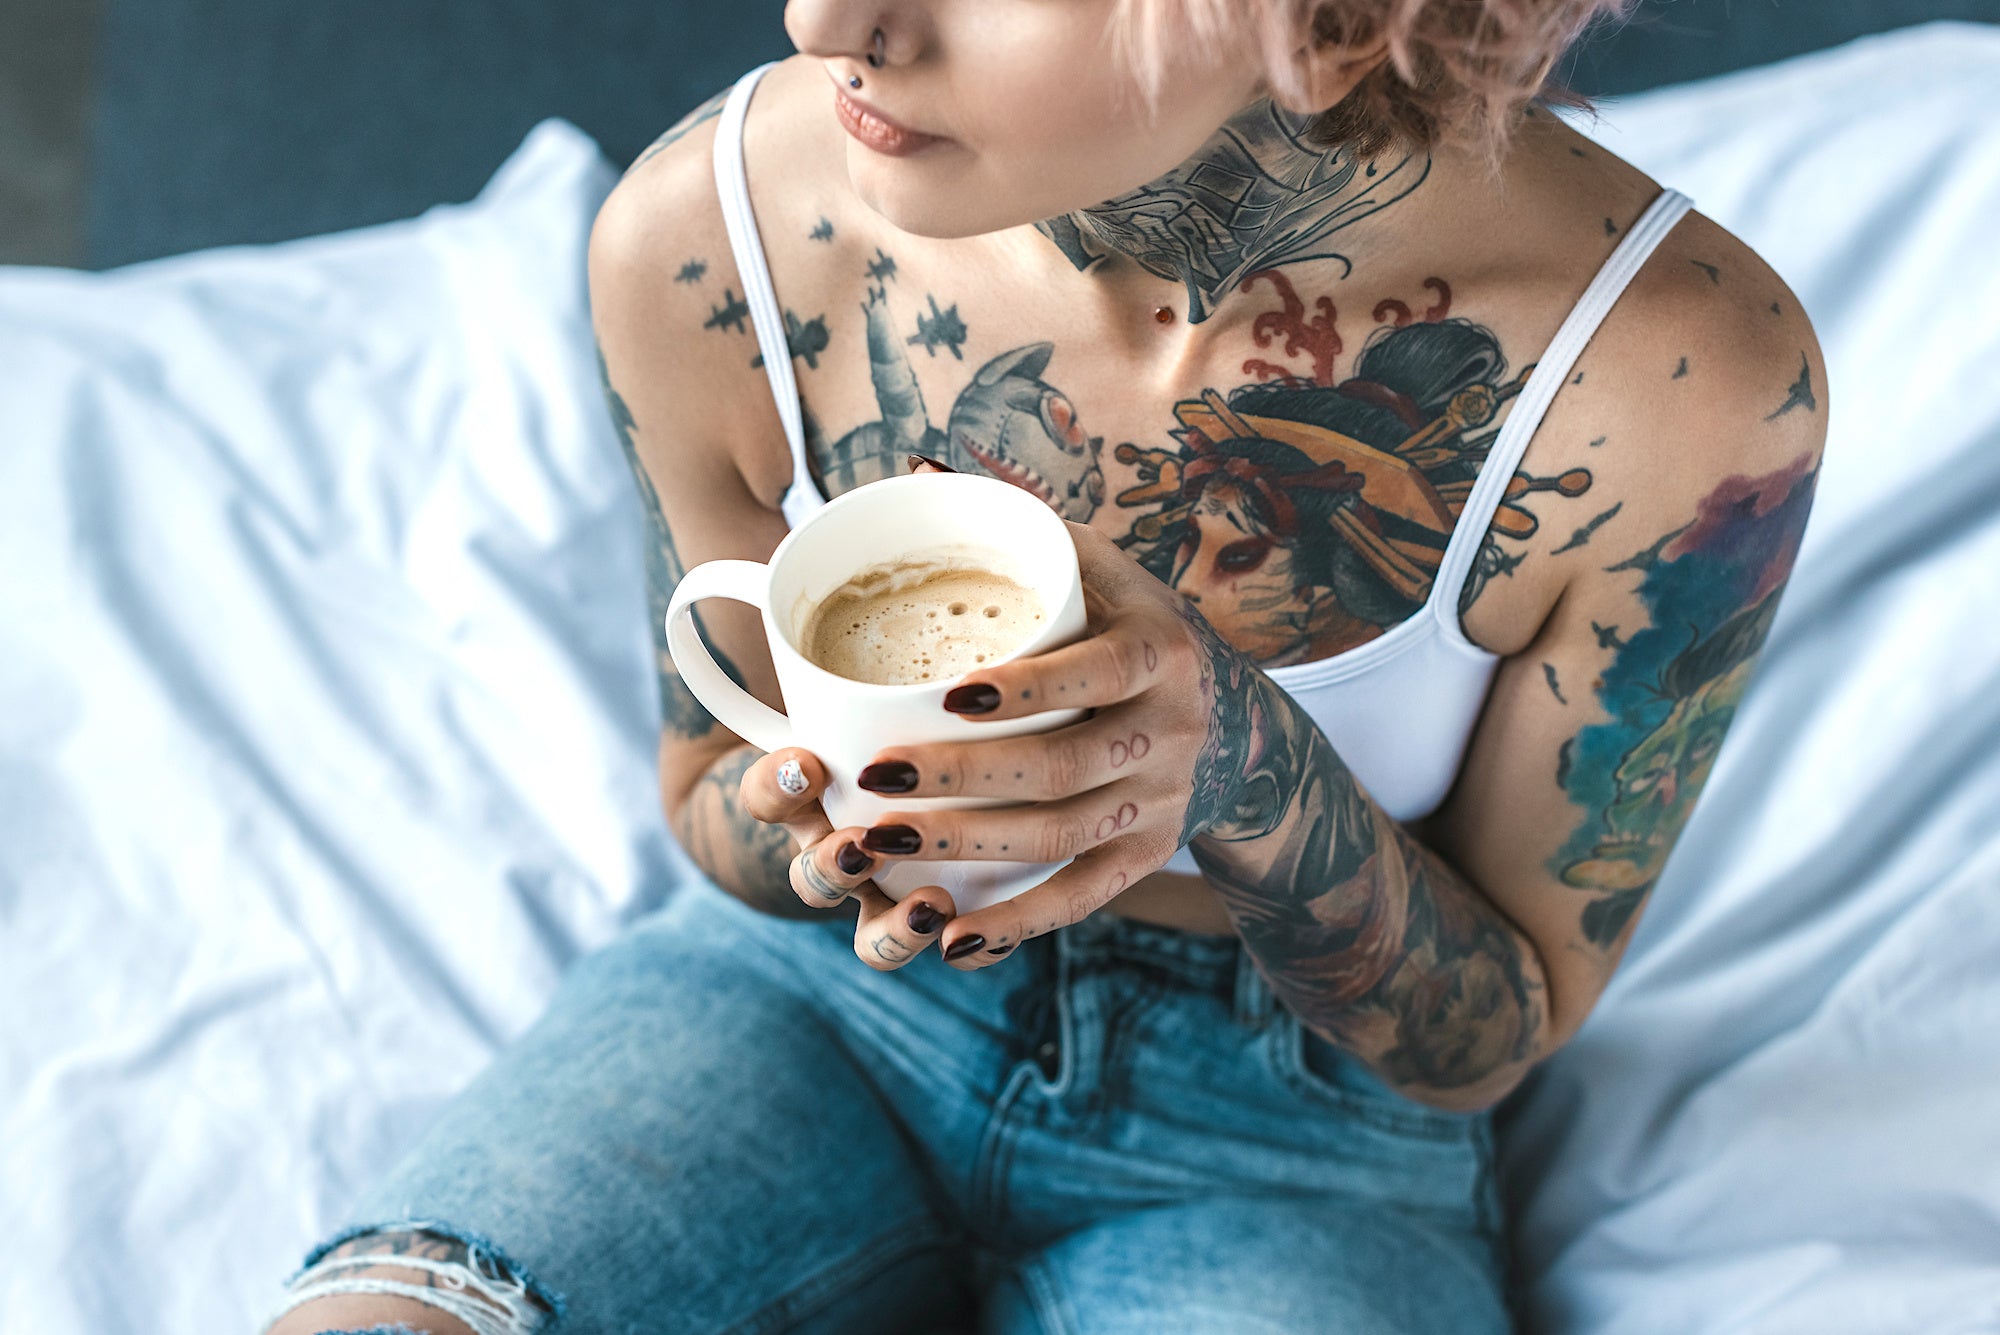 Tattoo Acne: Caring for Your Skin Without Ruining Your Ink Averr Aglow